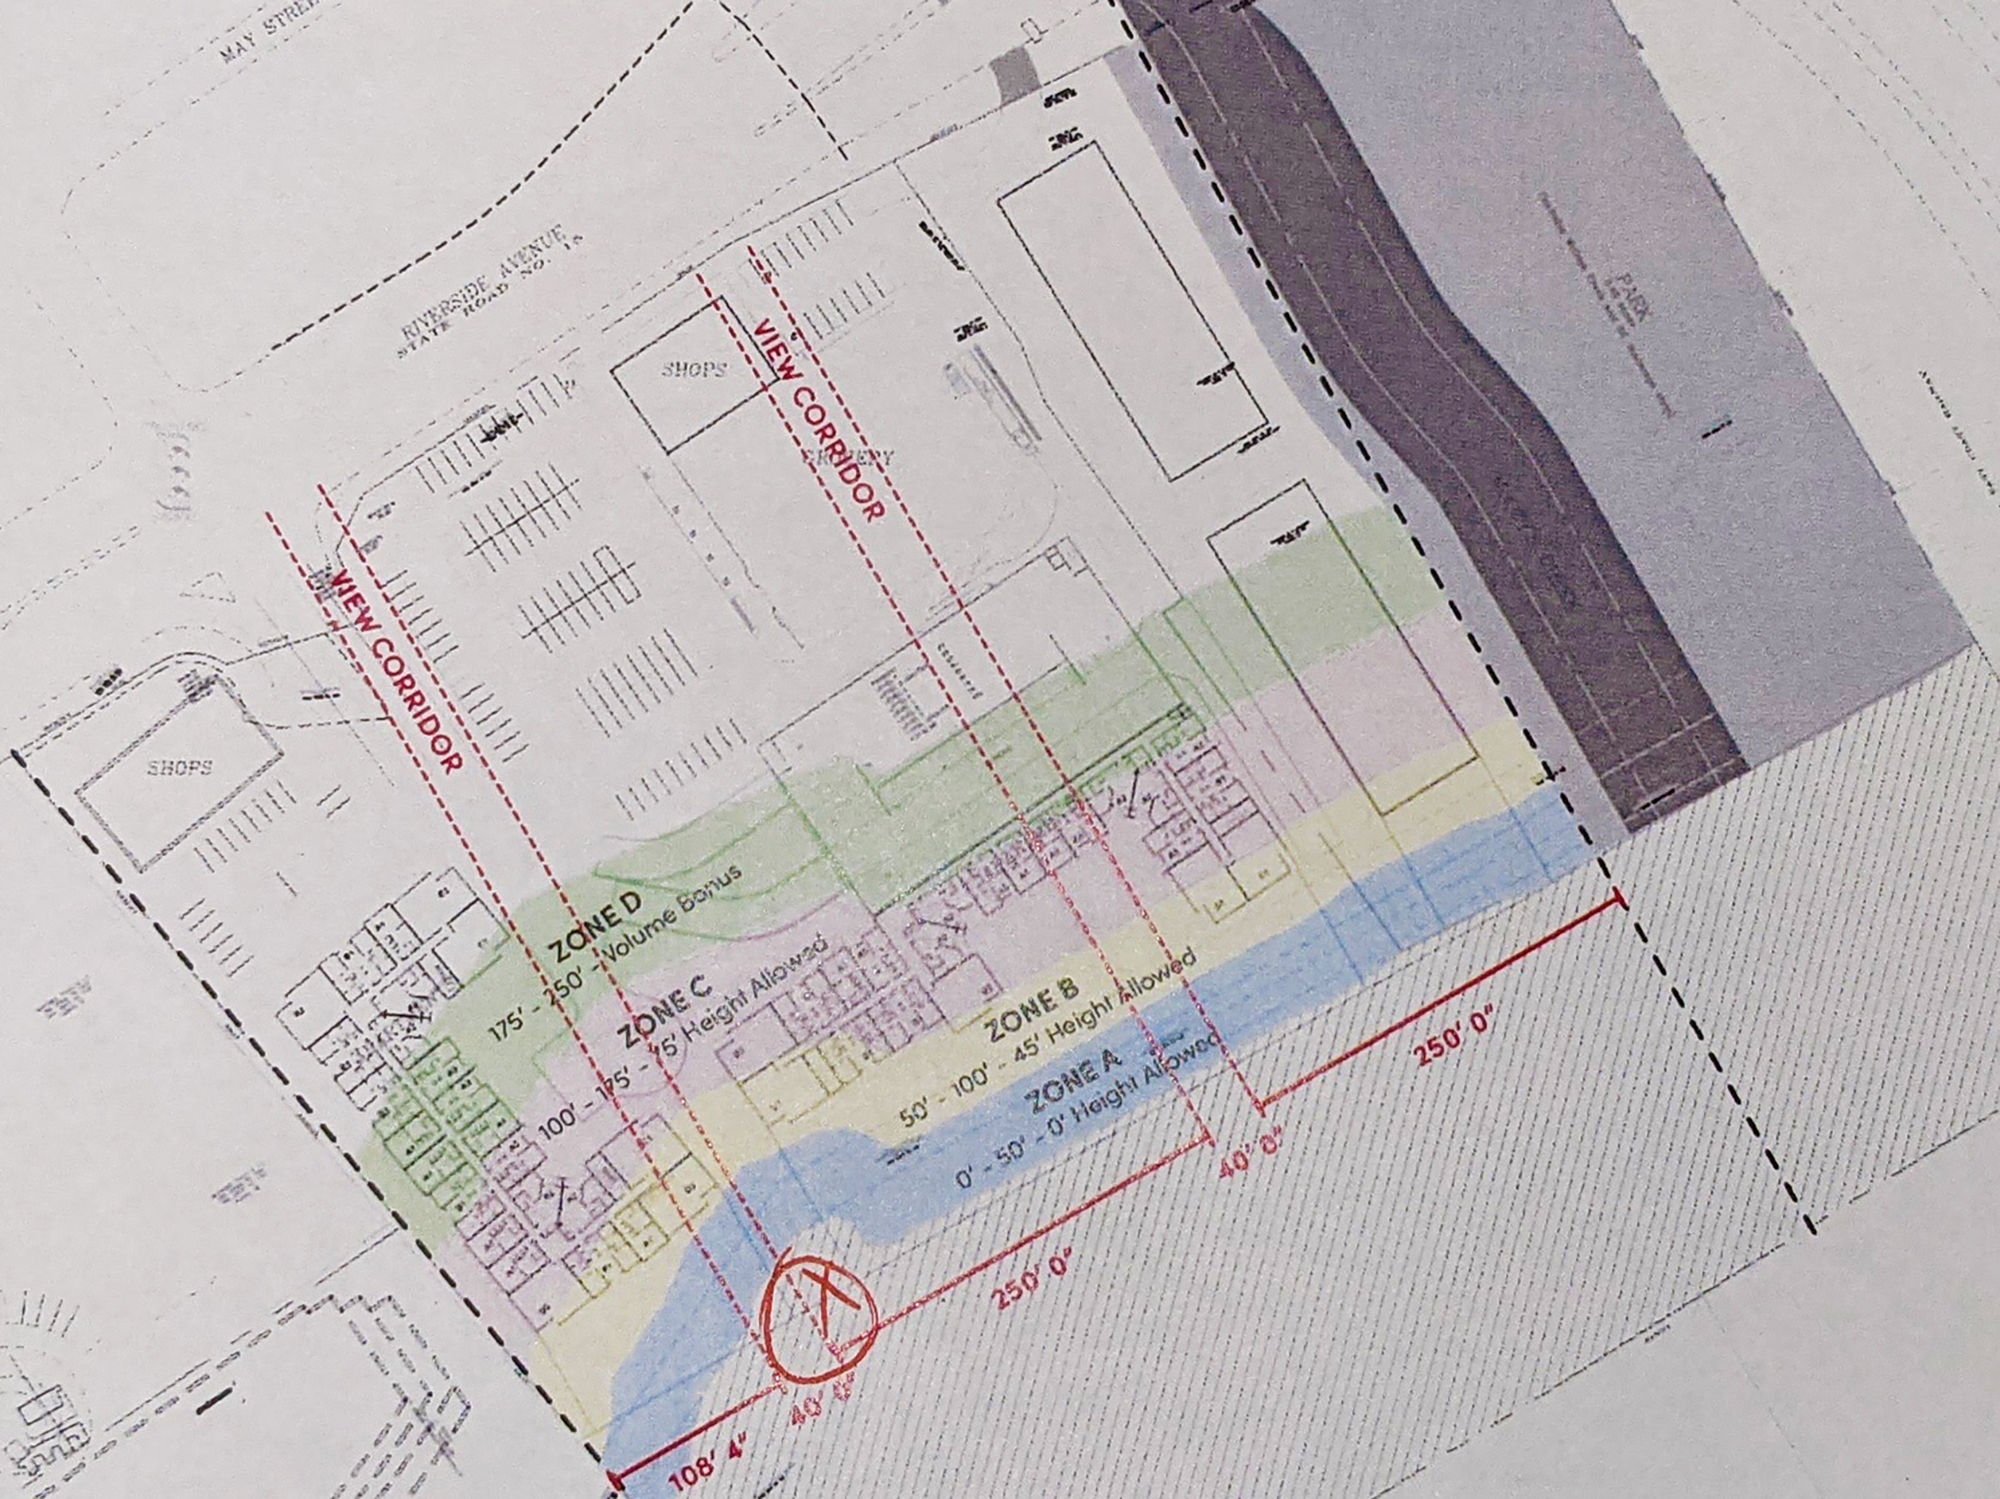 The latest site plan for the Times-Union development. The x on the map is the site's helipad.